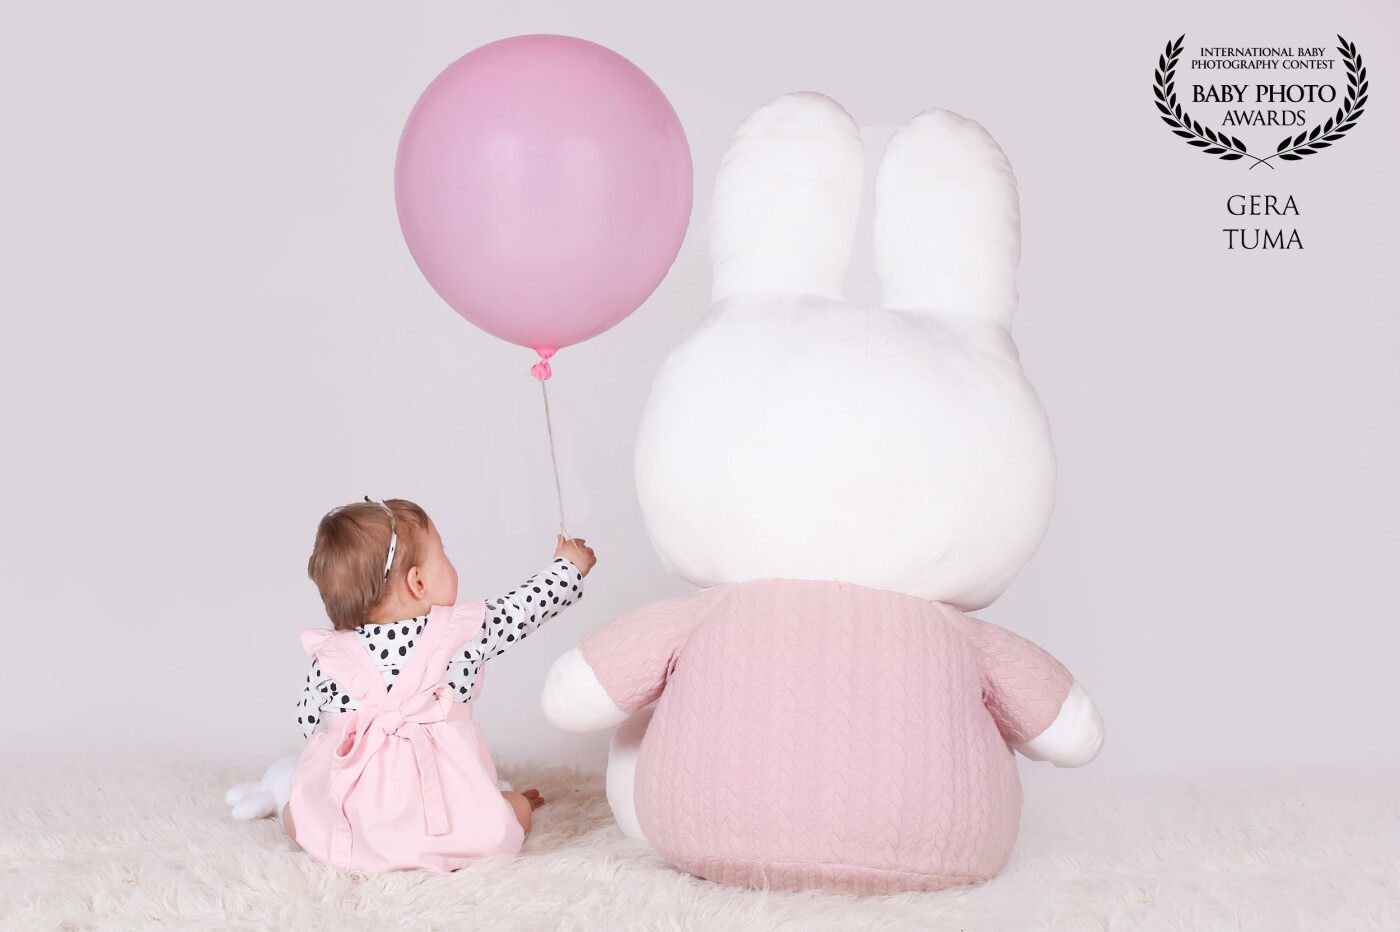 This girl was so in to Miffy, that the parents wanted a photo of the both of them together. <br />
The girl was almost 1 year old, and she gladly shared the balloon with Miffy...